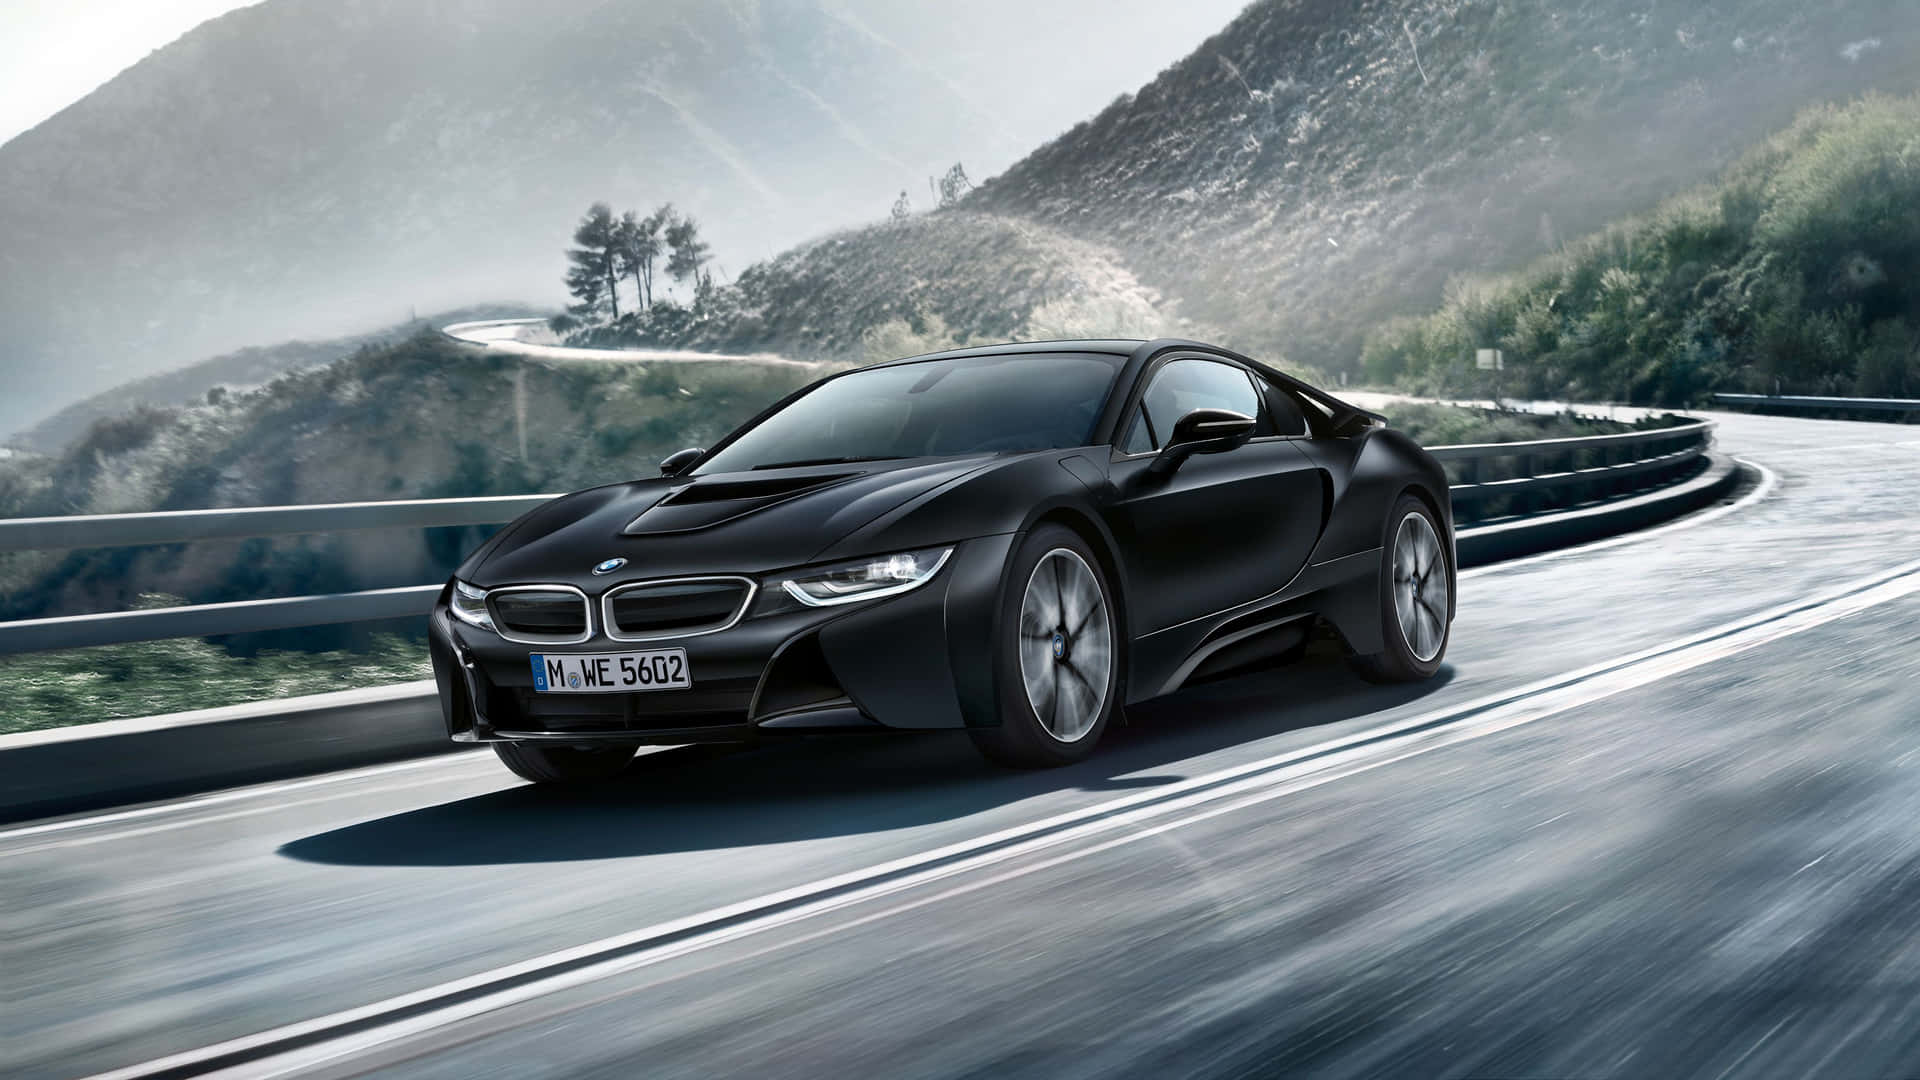 Get Behind The Wheel Of A Luxurious Bmw Background